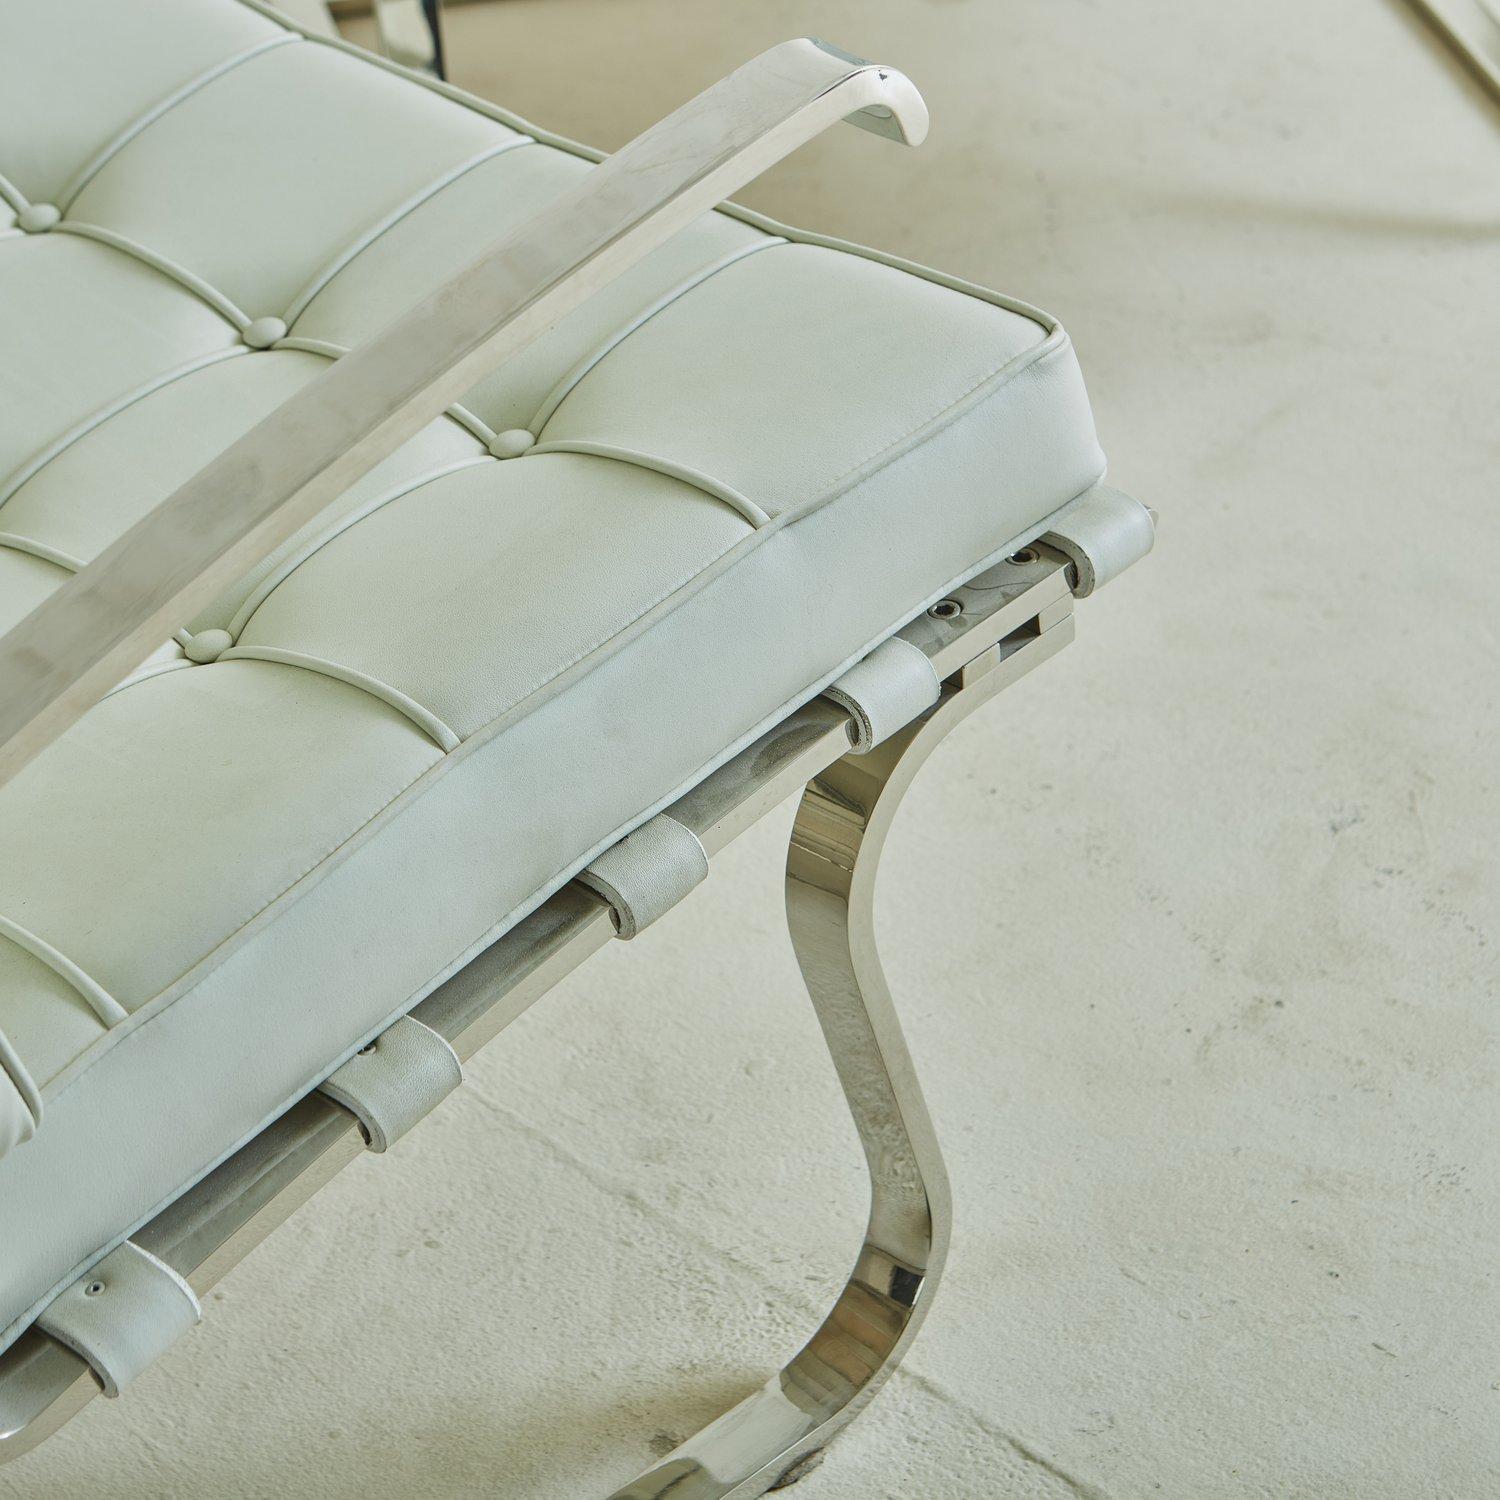 Late 20th Century Pair of Tugendhat Chairs in White Leather by Mies Van Der Rohe, 1929 For Sale